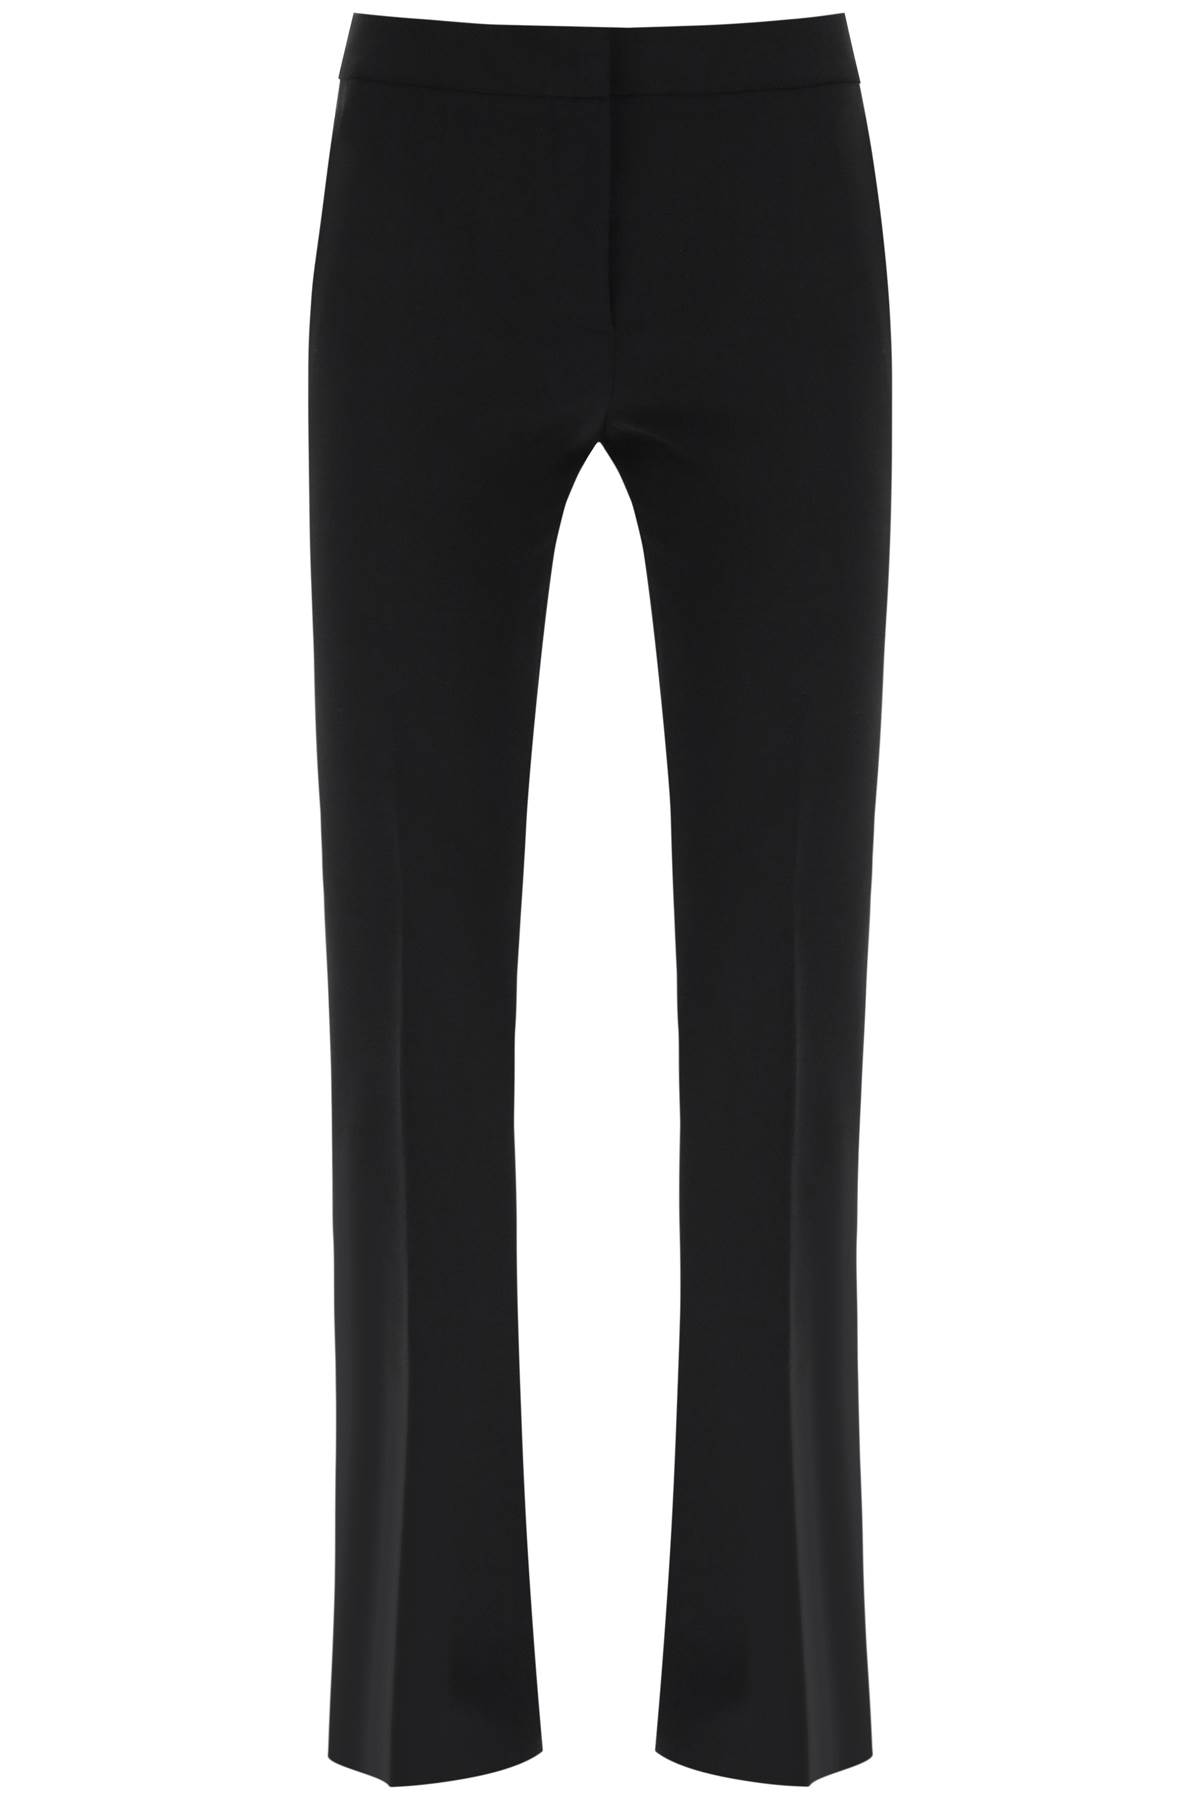 Moschino Cady Tailored Trousers